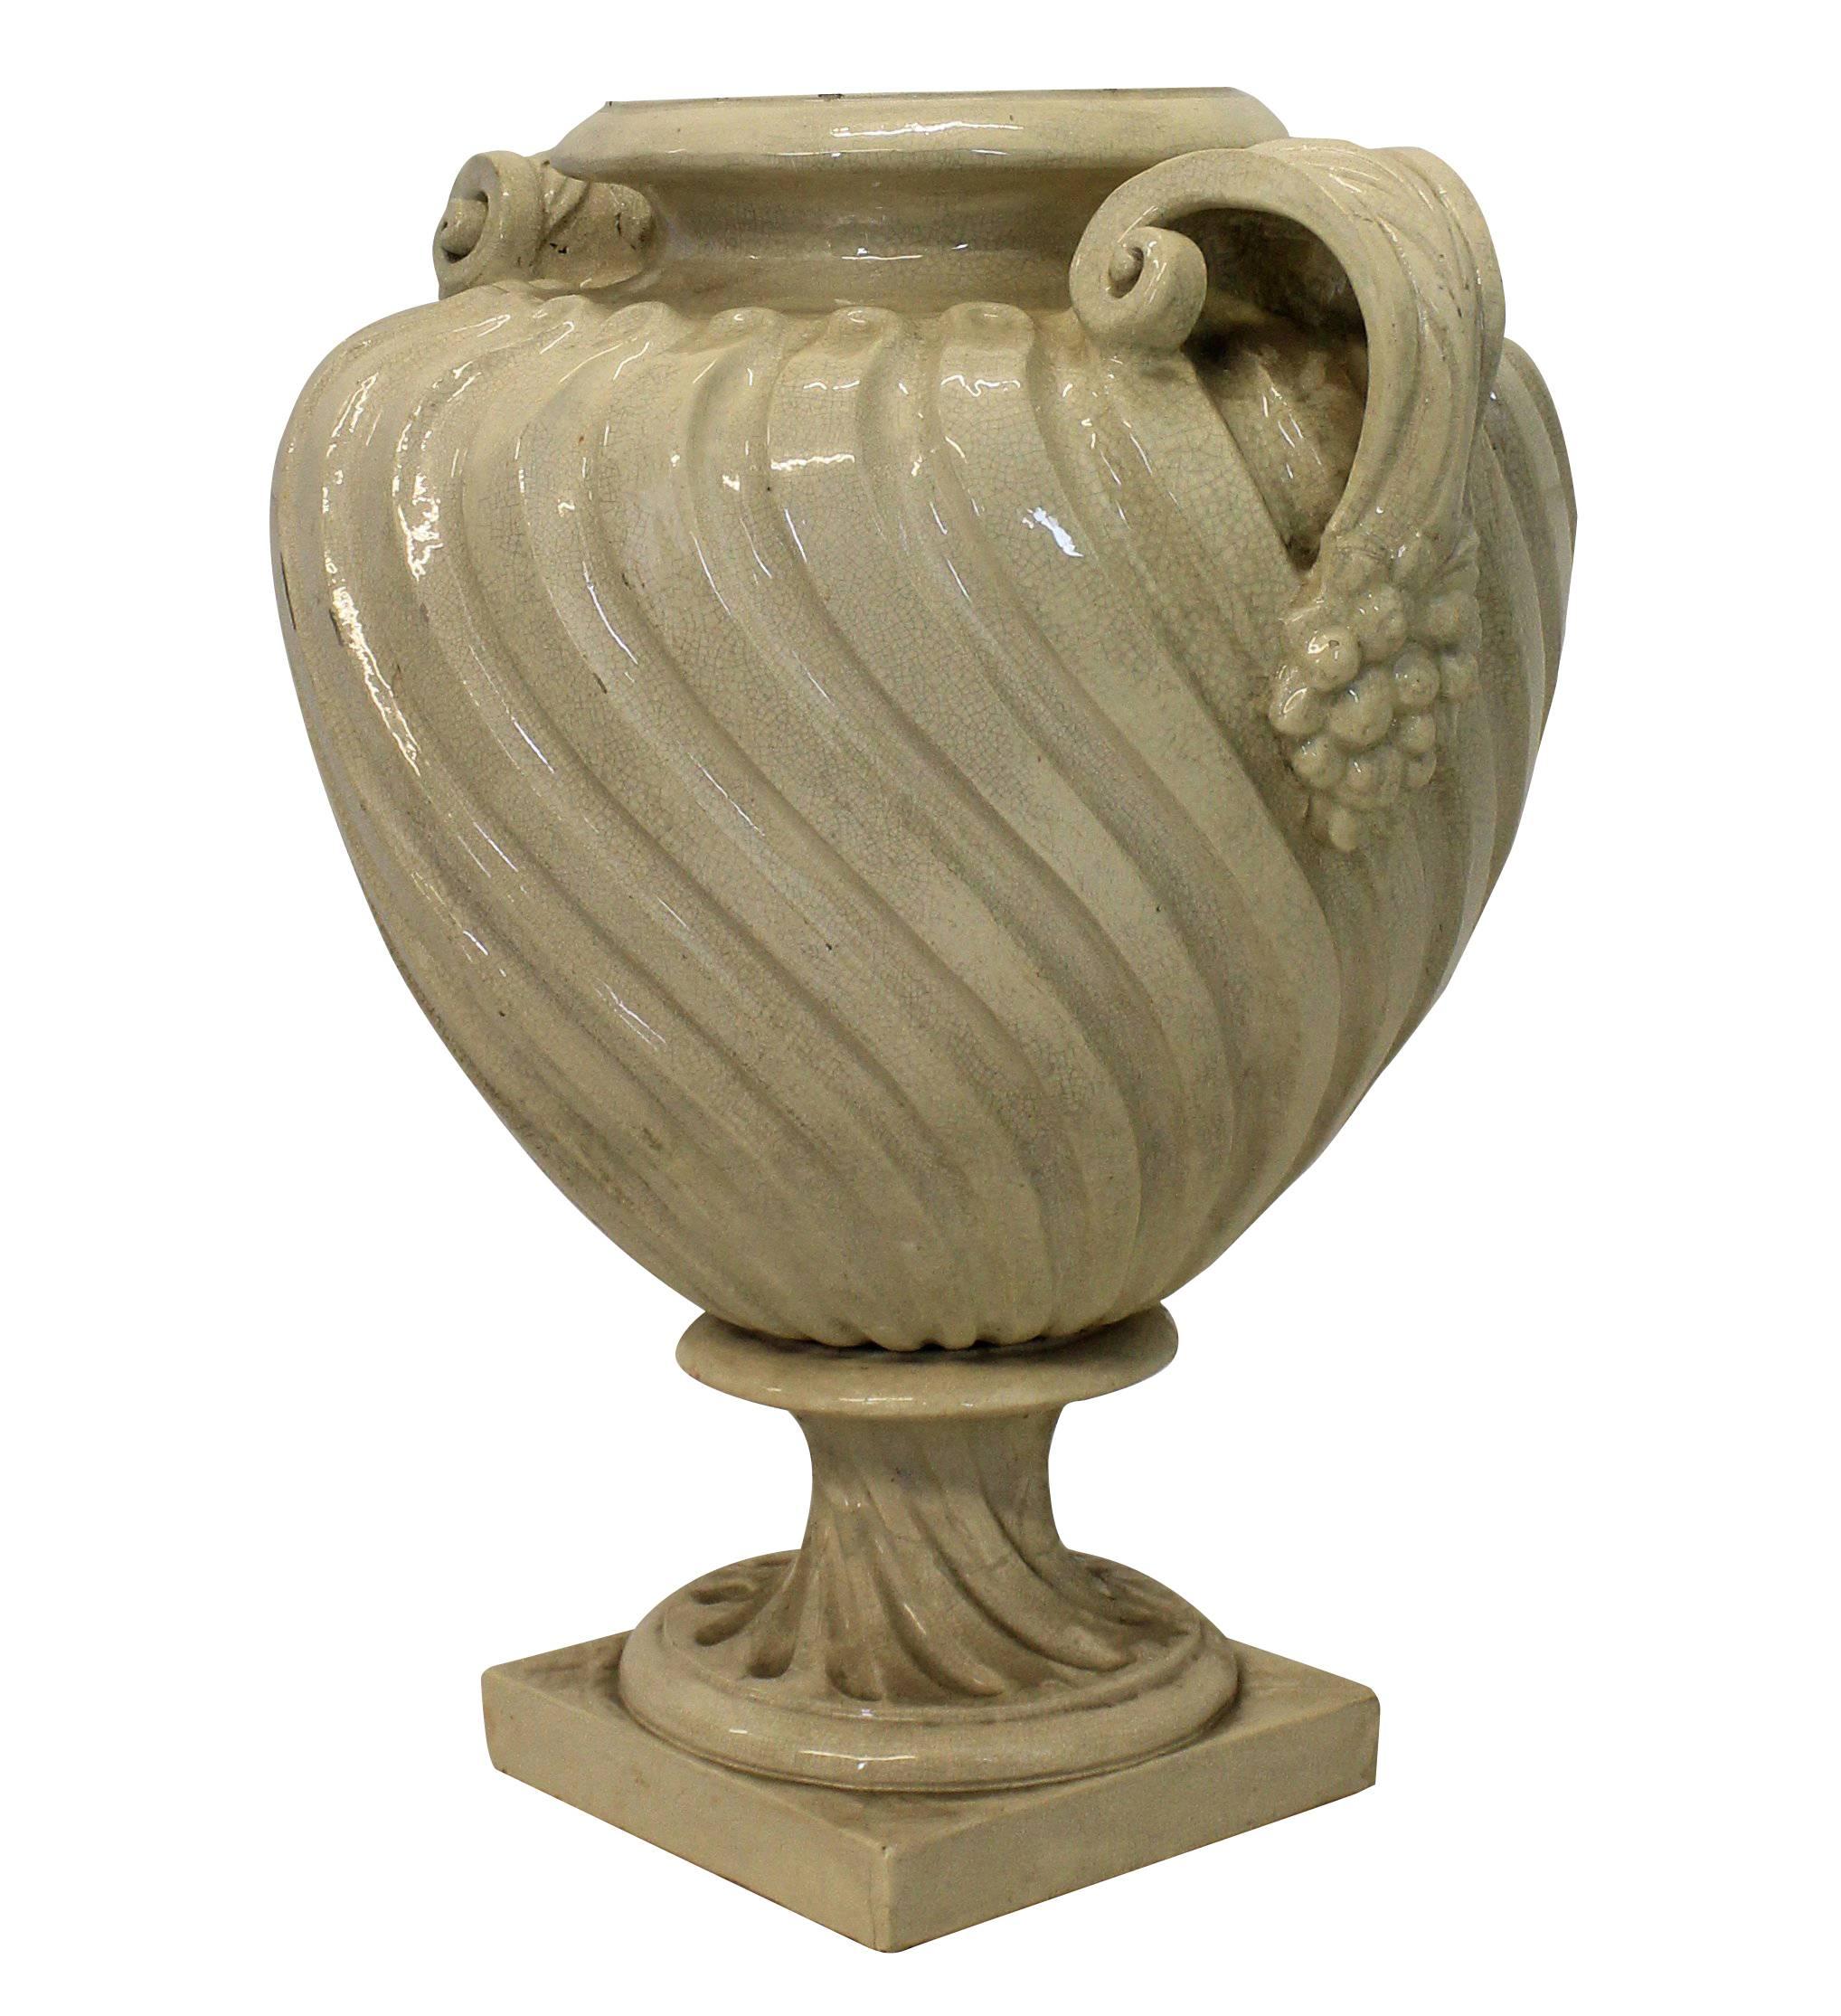 A large English Doulton twin handled urn of unusual shape and design in a cream glaze.